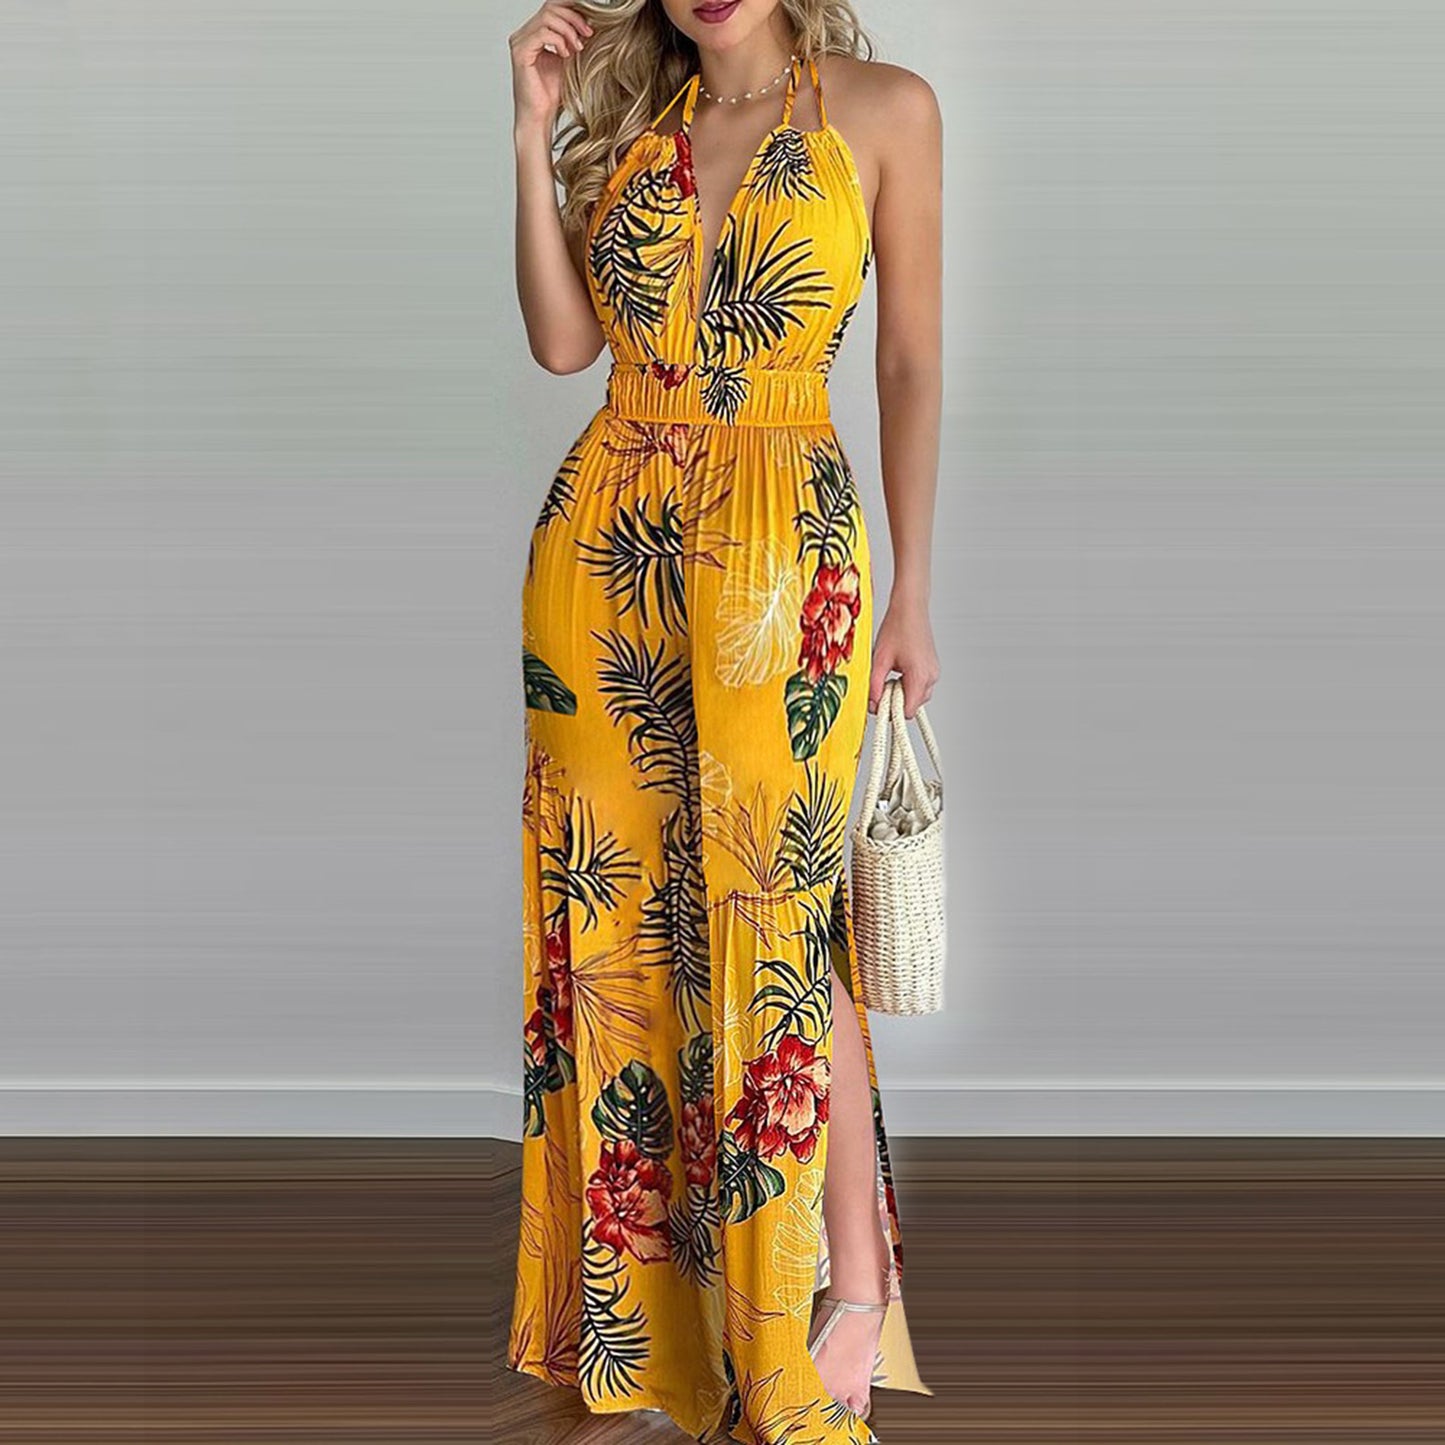 Stand-Alone Colorful Jumpsuit with Wish-Inspired Digital Printing